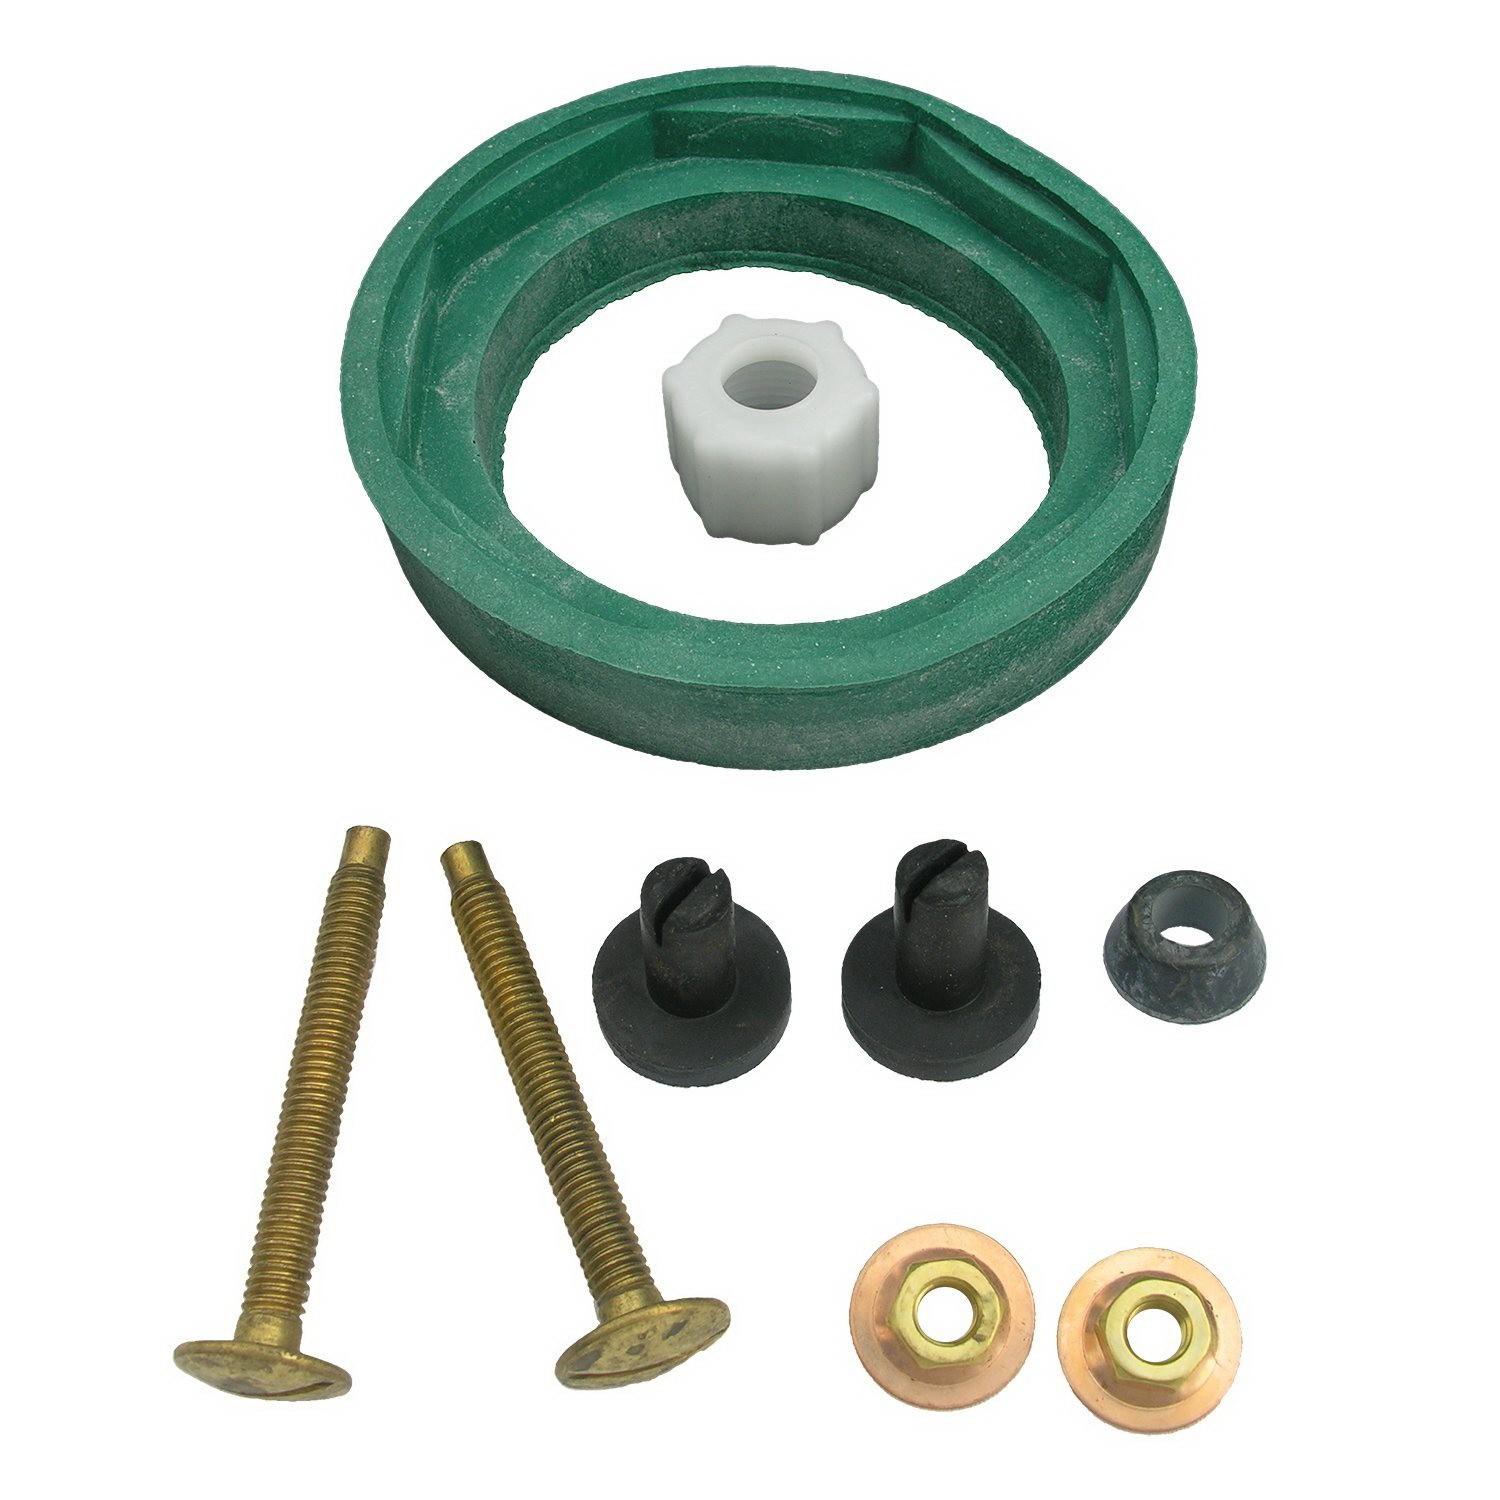 CHAMPION CLOSE CPLG KIT 738756-0070A